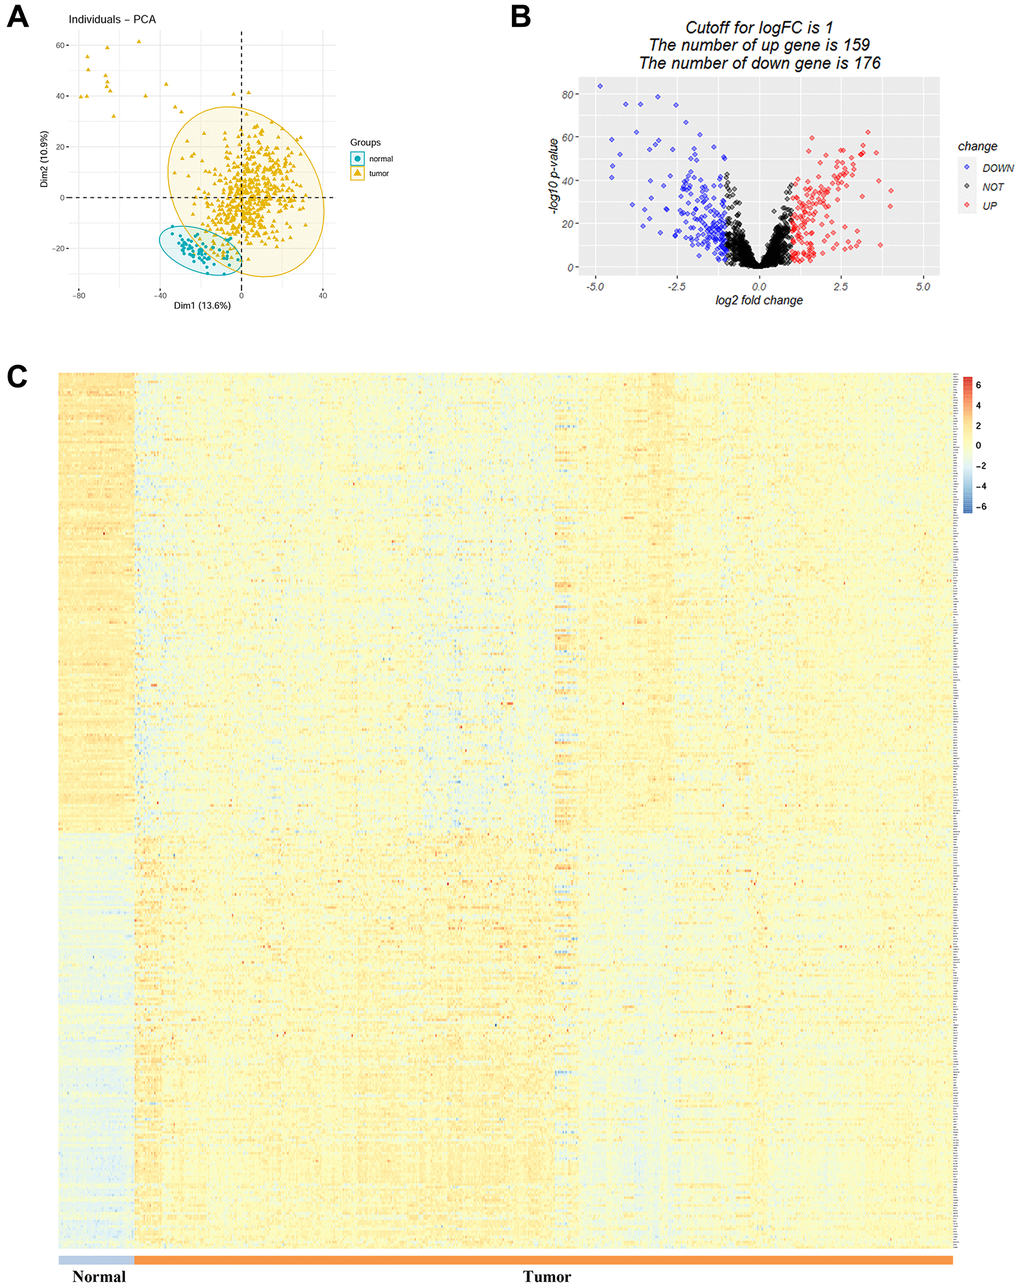 Analysis of differentially expressed telomere-related genes in LUAD. (A) Principal component analysis between LUAD and normal control. (B) and (C) Volcano plot and heatmap showing the up-regulated and down-regulated telomere-related genes in LUAD.